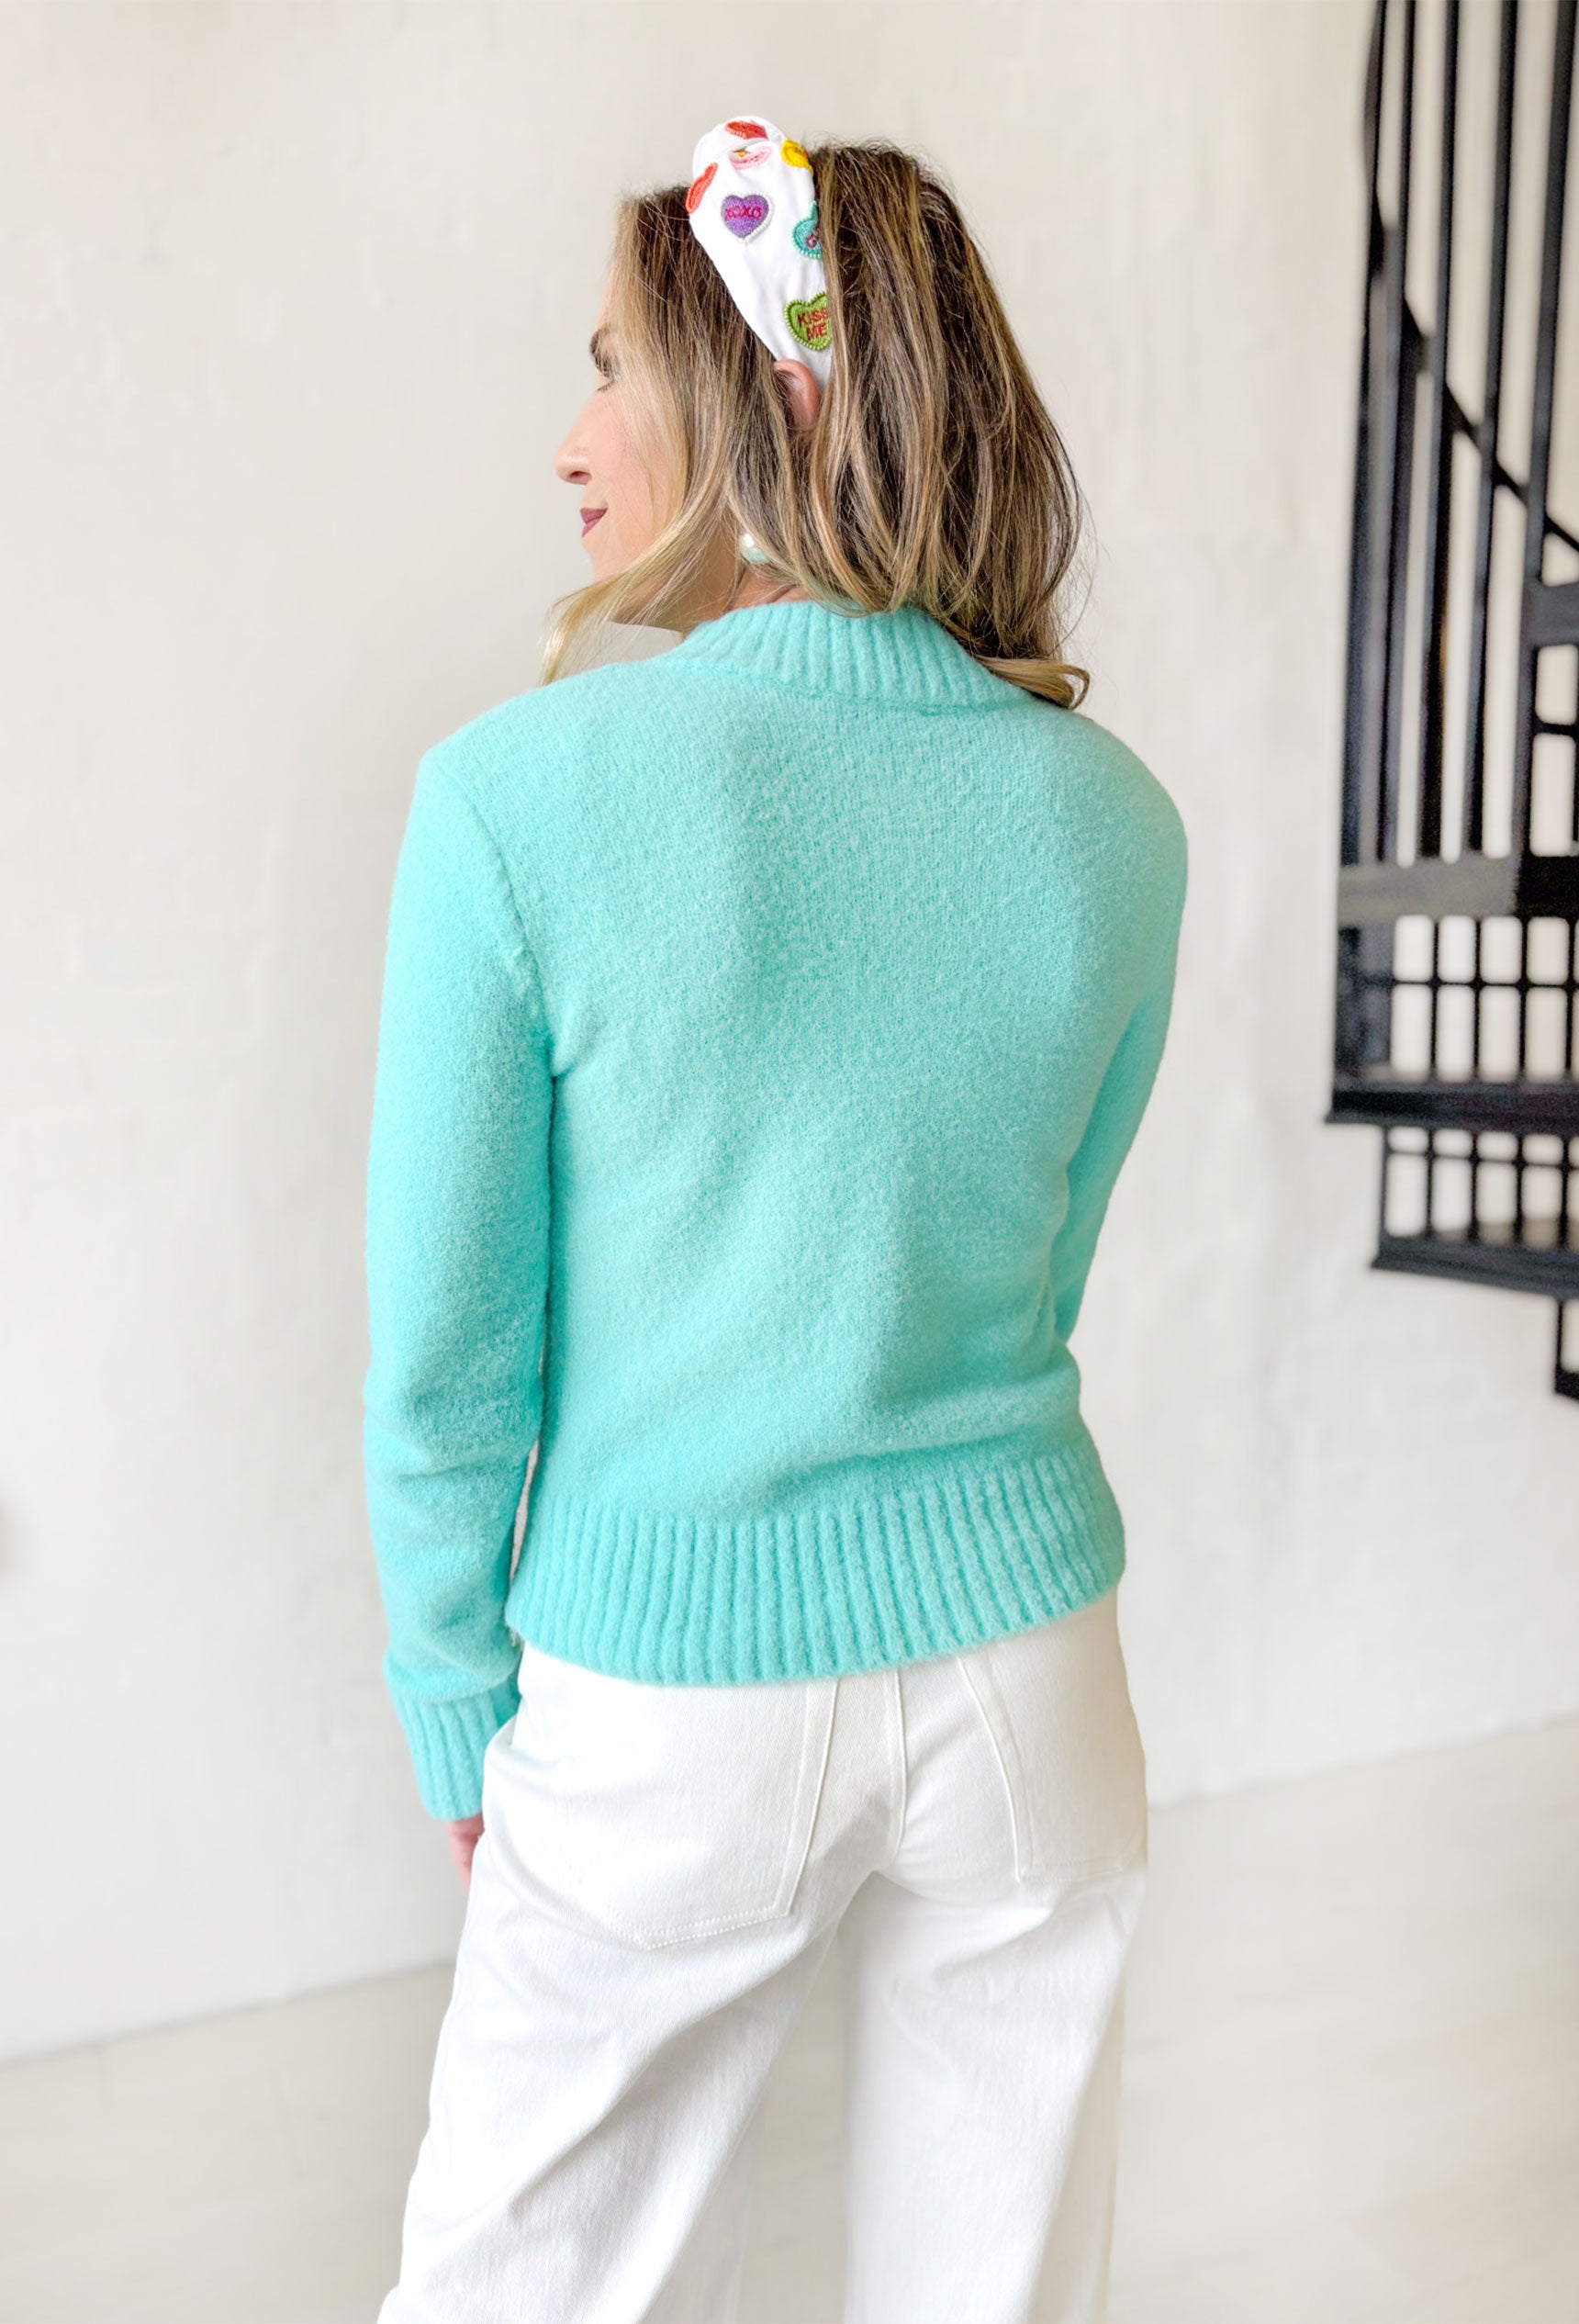 Escape The Chill Sweater, fluffy knit mock neck fitted sweater